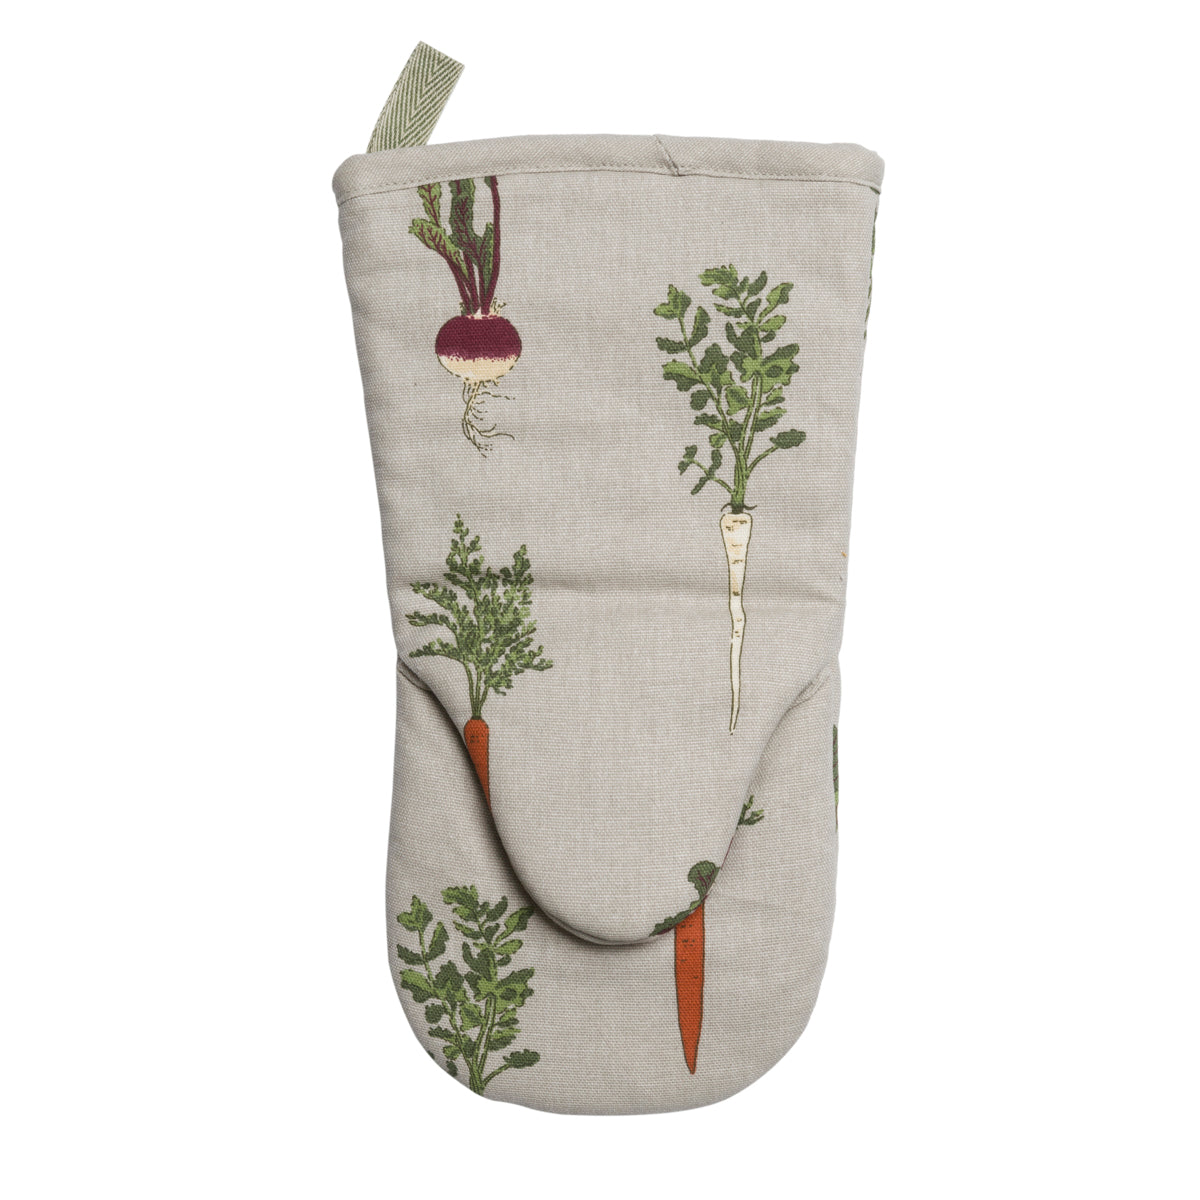 Oven Mitt covered in home grown vegetables by Sophie Allport